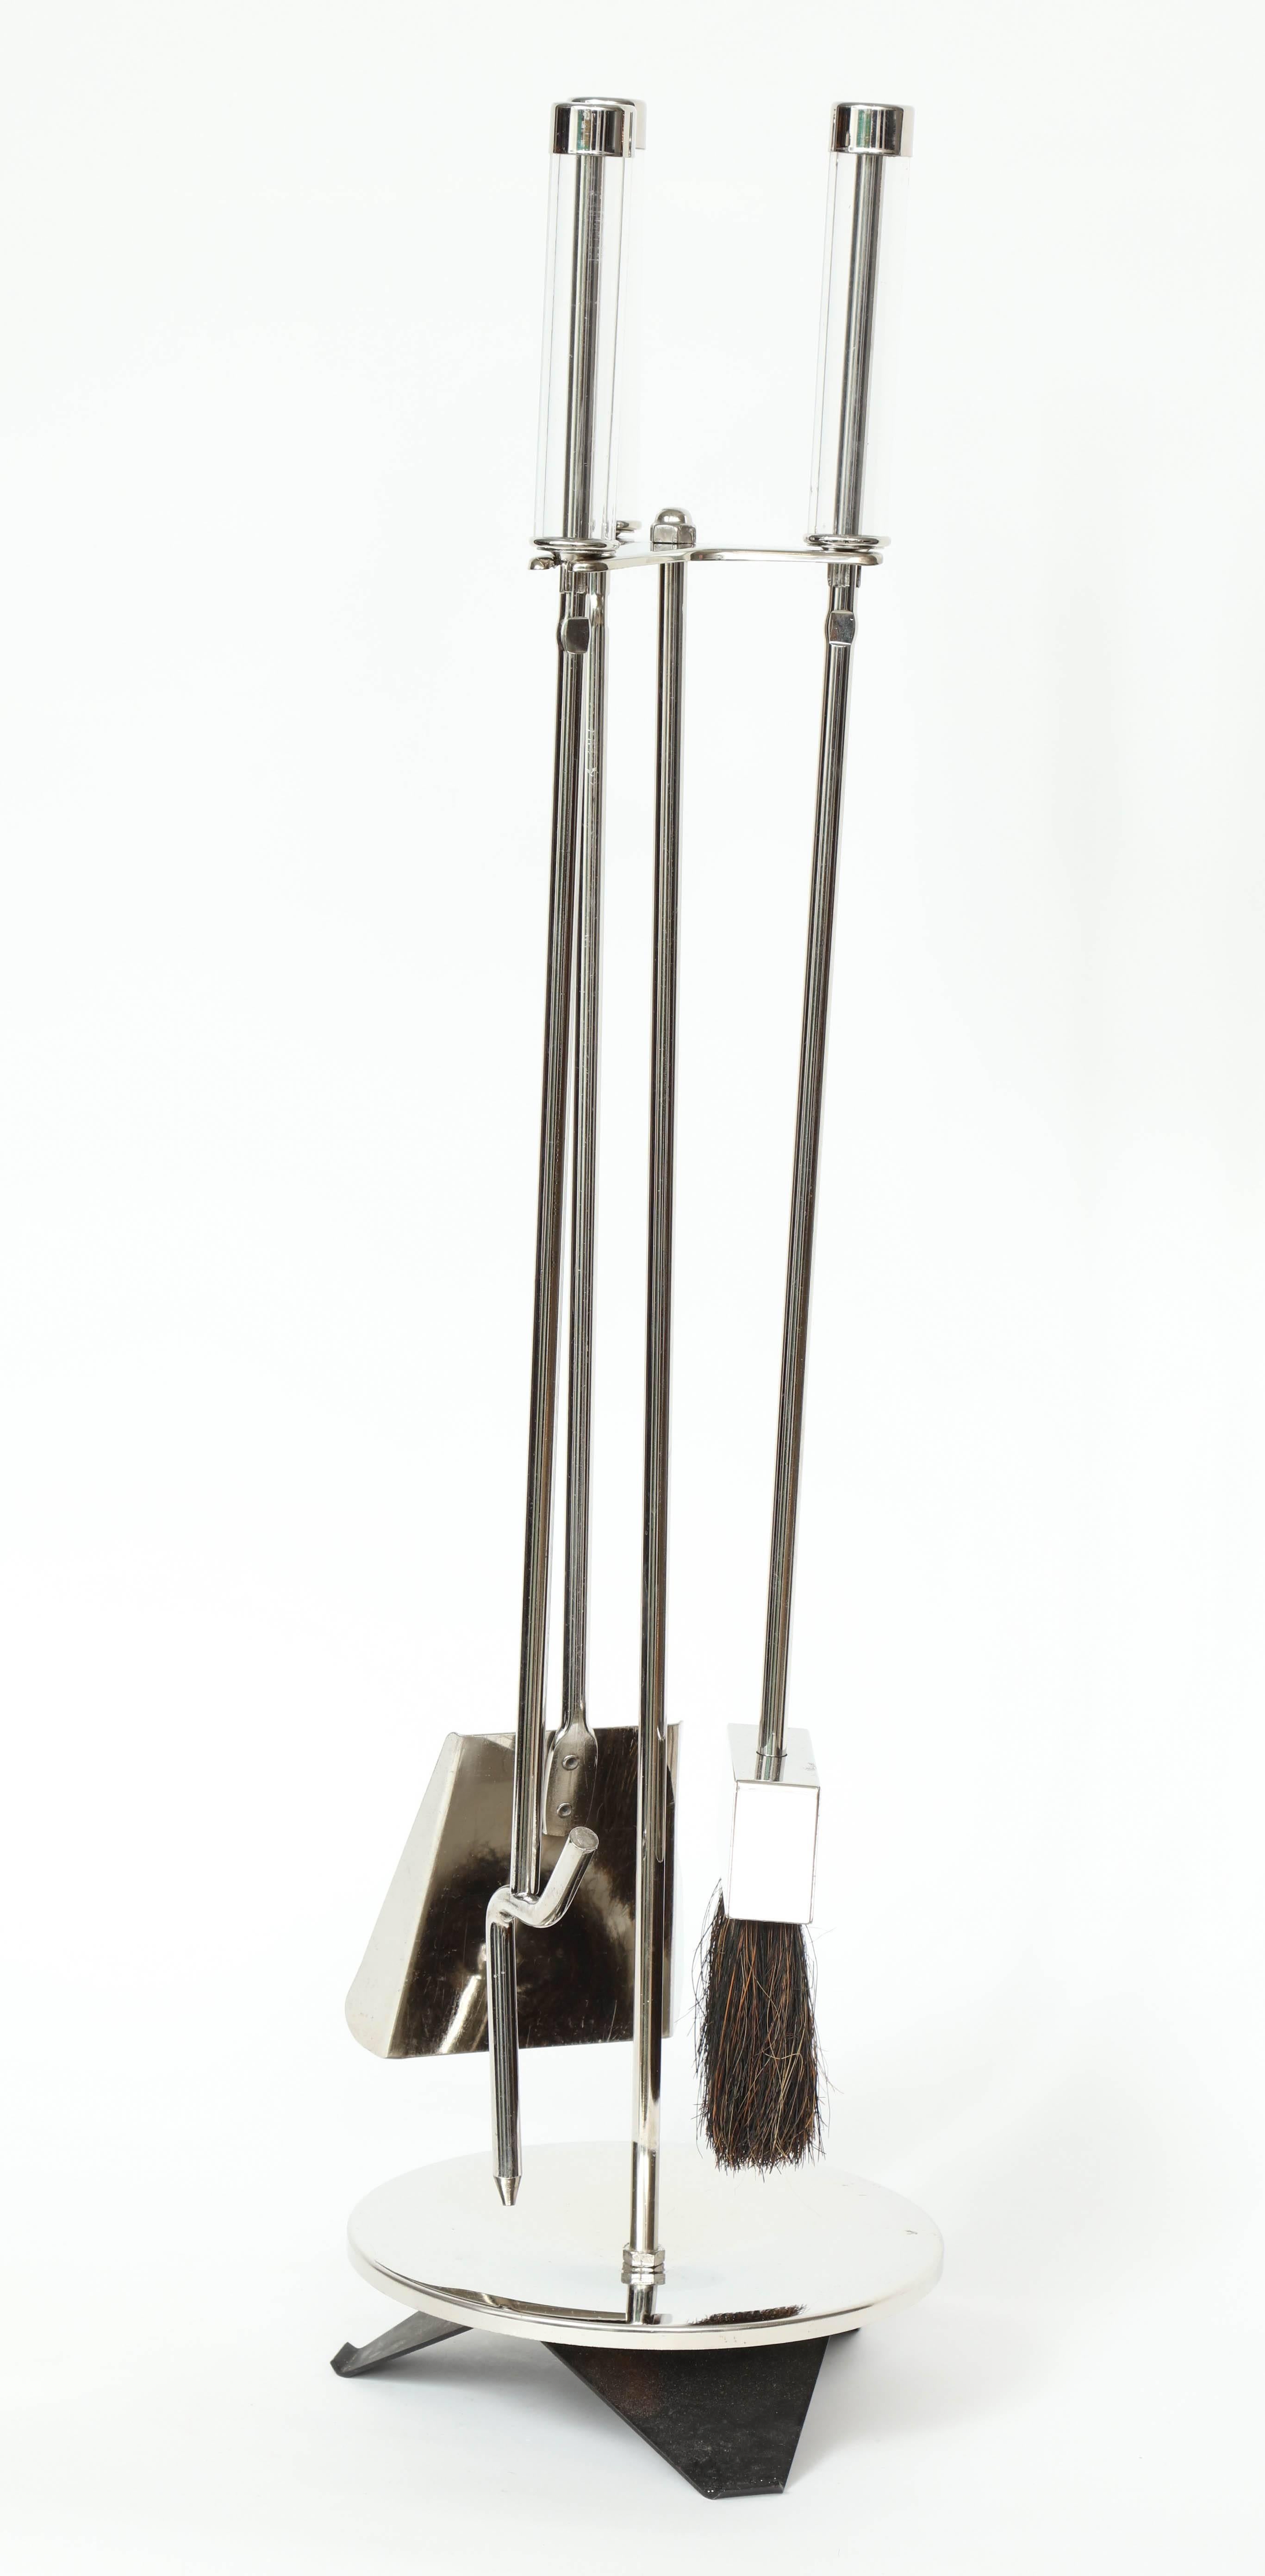 Set of three streamlined polished nickel fire tools with Lucite handles suspended on a nickel frame with black enamel flared base.